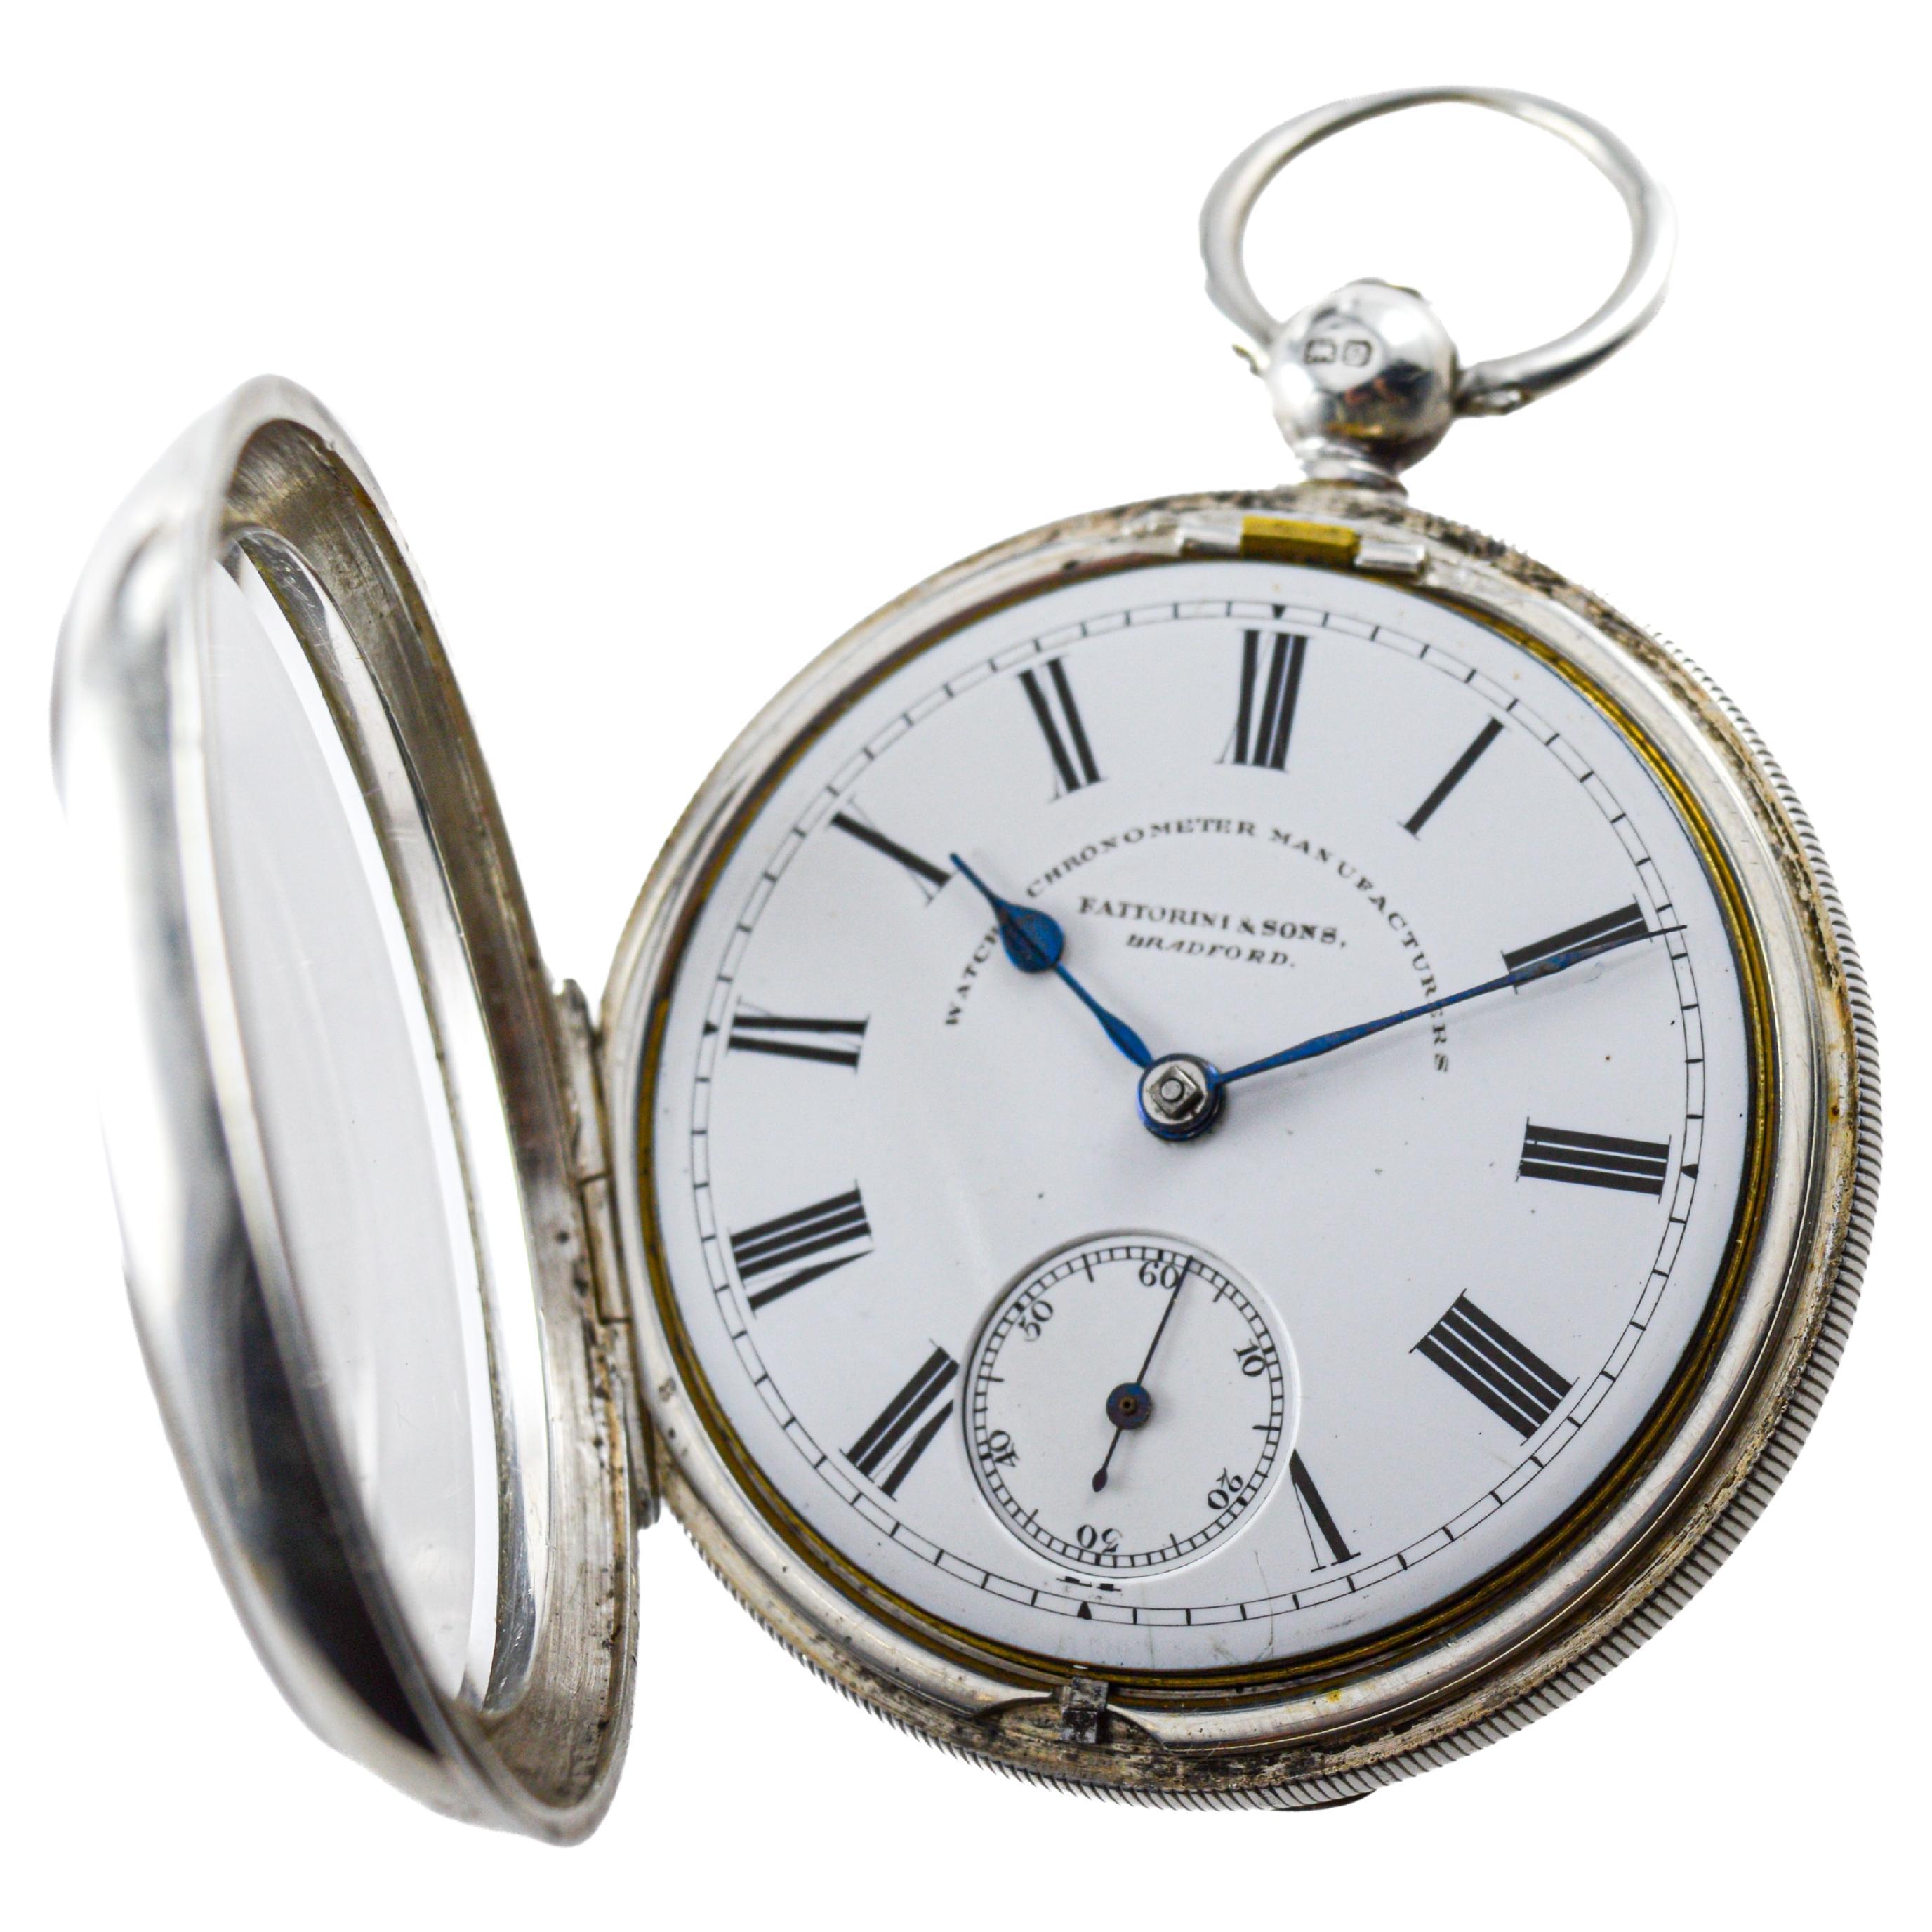 Fattorini & Sons Silver Keywind with Original Kiln Fired Enamel Dial from 1880's For Sale 2